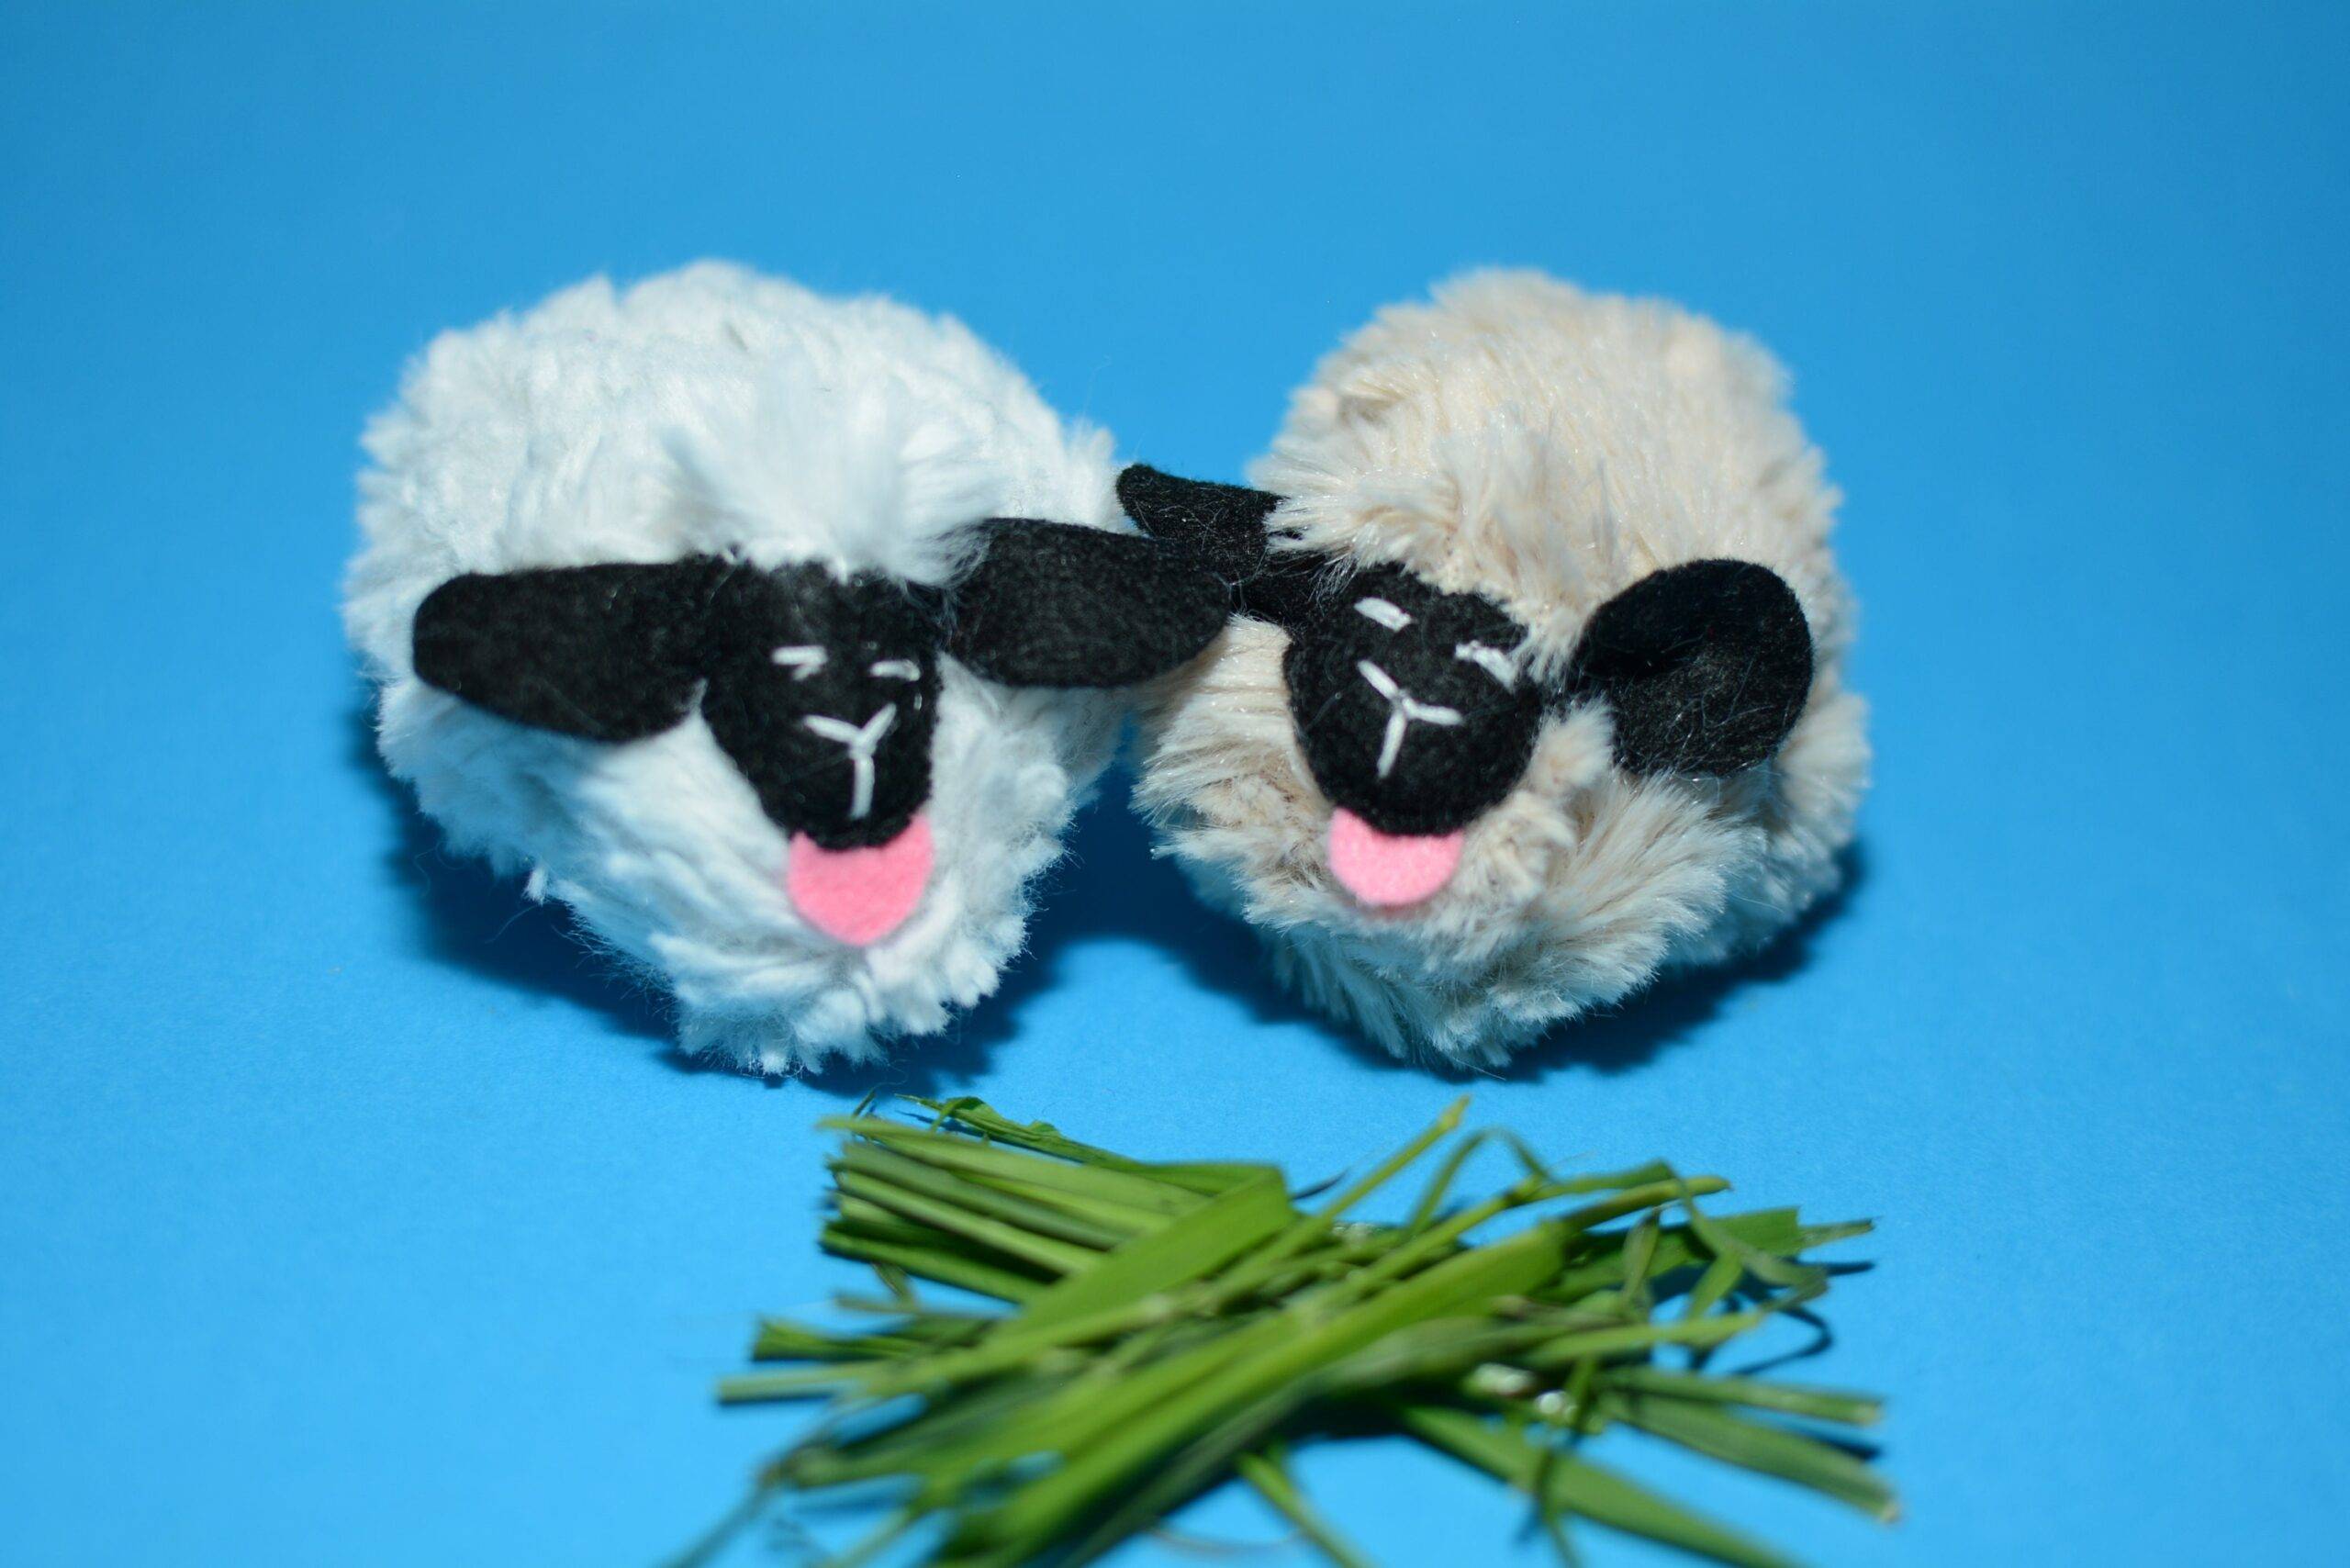 Sheep catnip toys for cats – gifts for pets cats, catnip toy, cute cat toys, Crafts4cats